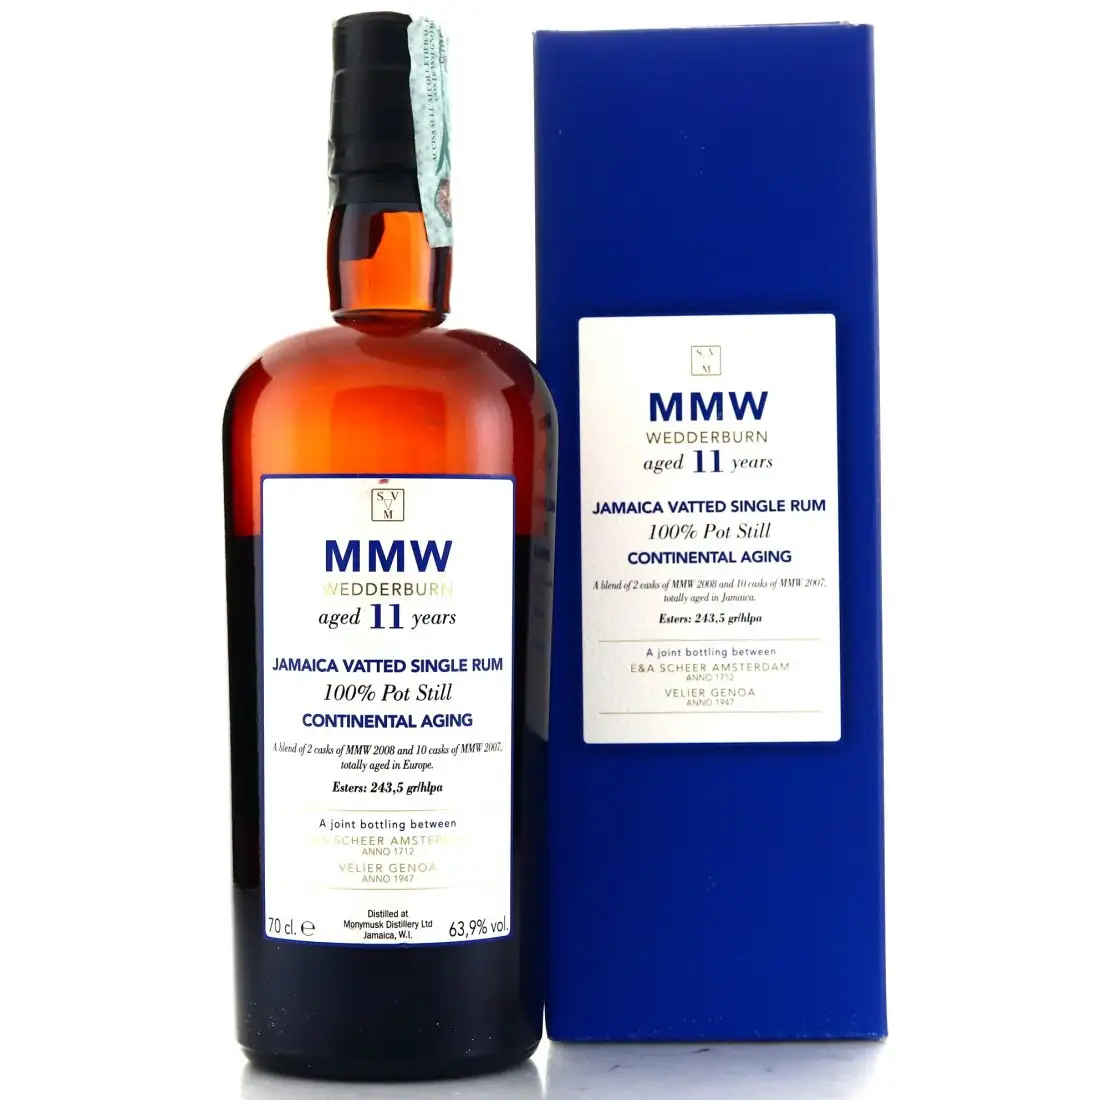 Image of the front of the bottle of the rum Wedderburn Continental Aging MMW